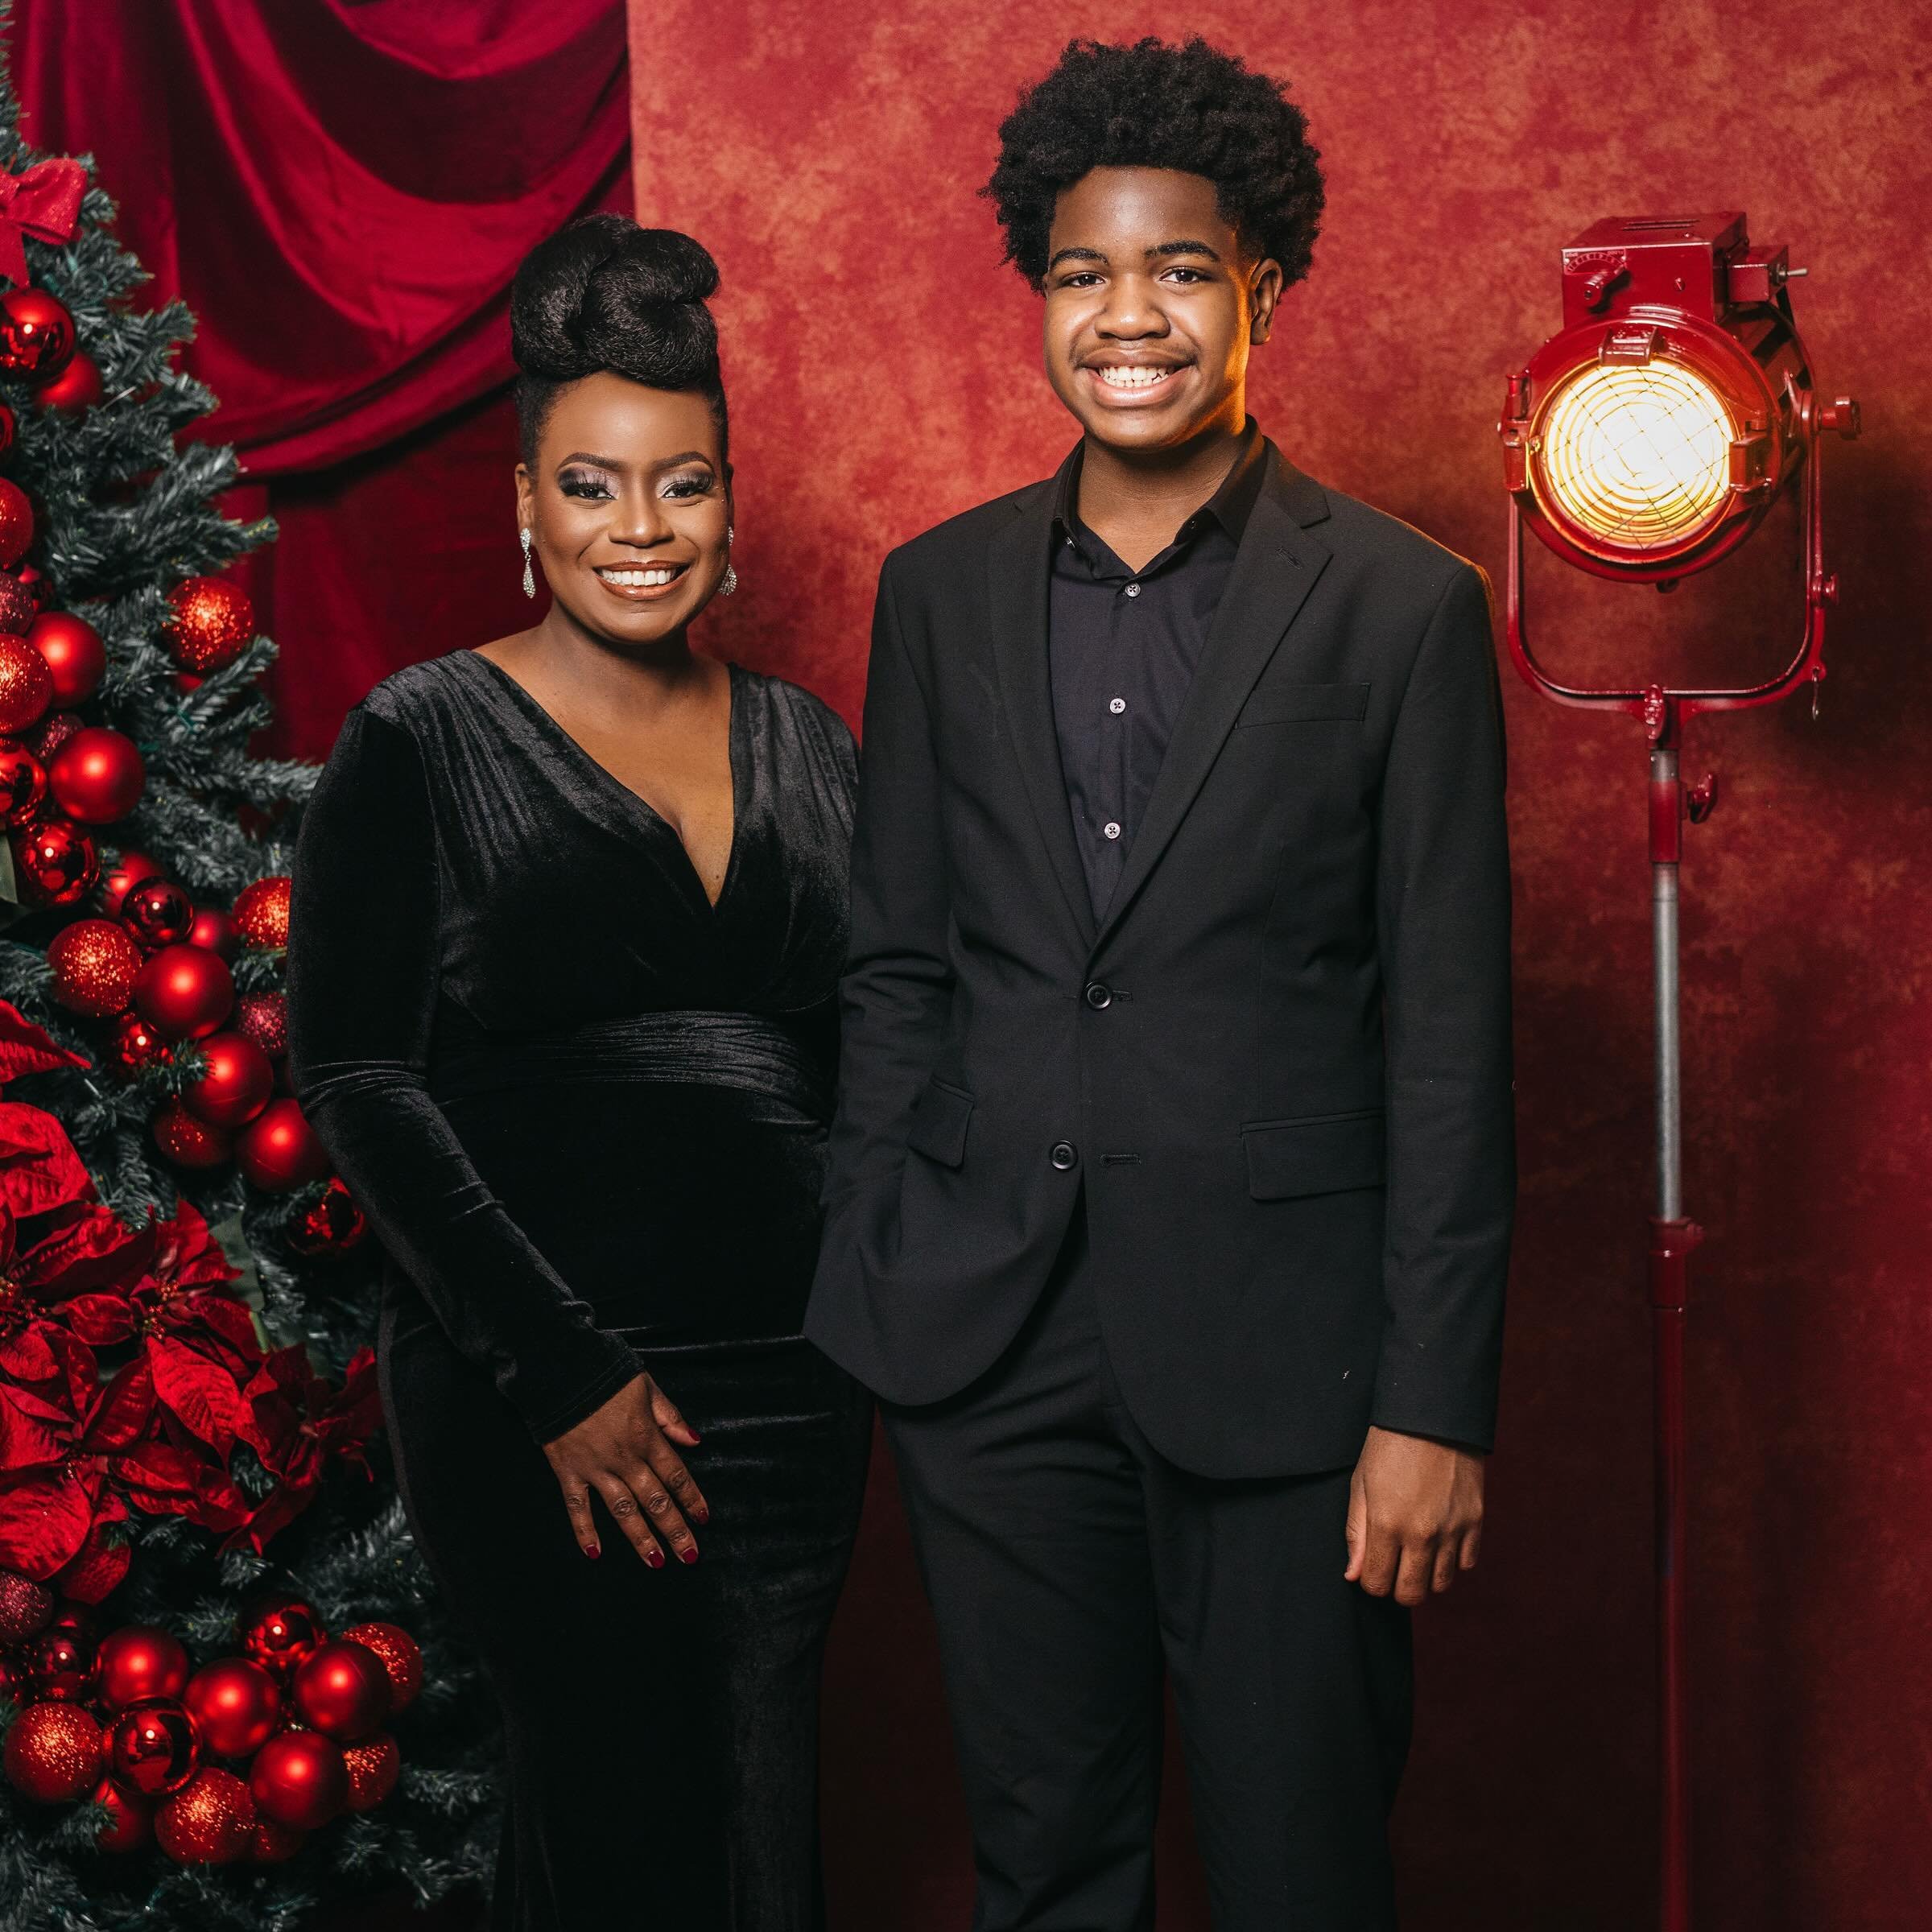 #TBT to our holiday photo session with @dexterityproductions! Maybe it&rsquo;s time for a non-seasonal shoot soon?🤷🏾&zwj;♀️

Approaching Mother&rsquo;s Day, I&rsquo;m reminded of how blessed I am to be Zay&rsquo;s mom. He&rsquo;s a leader, strong-w